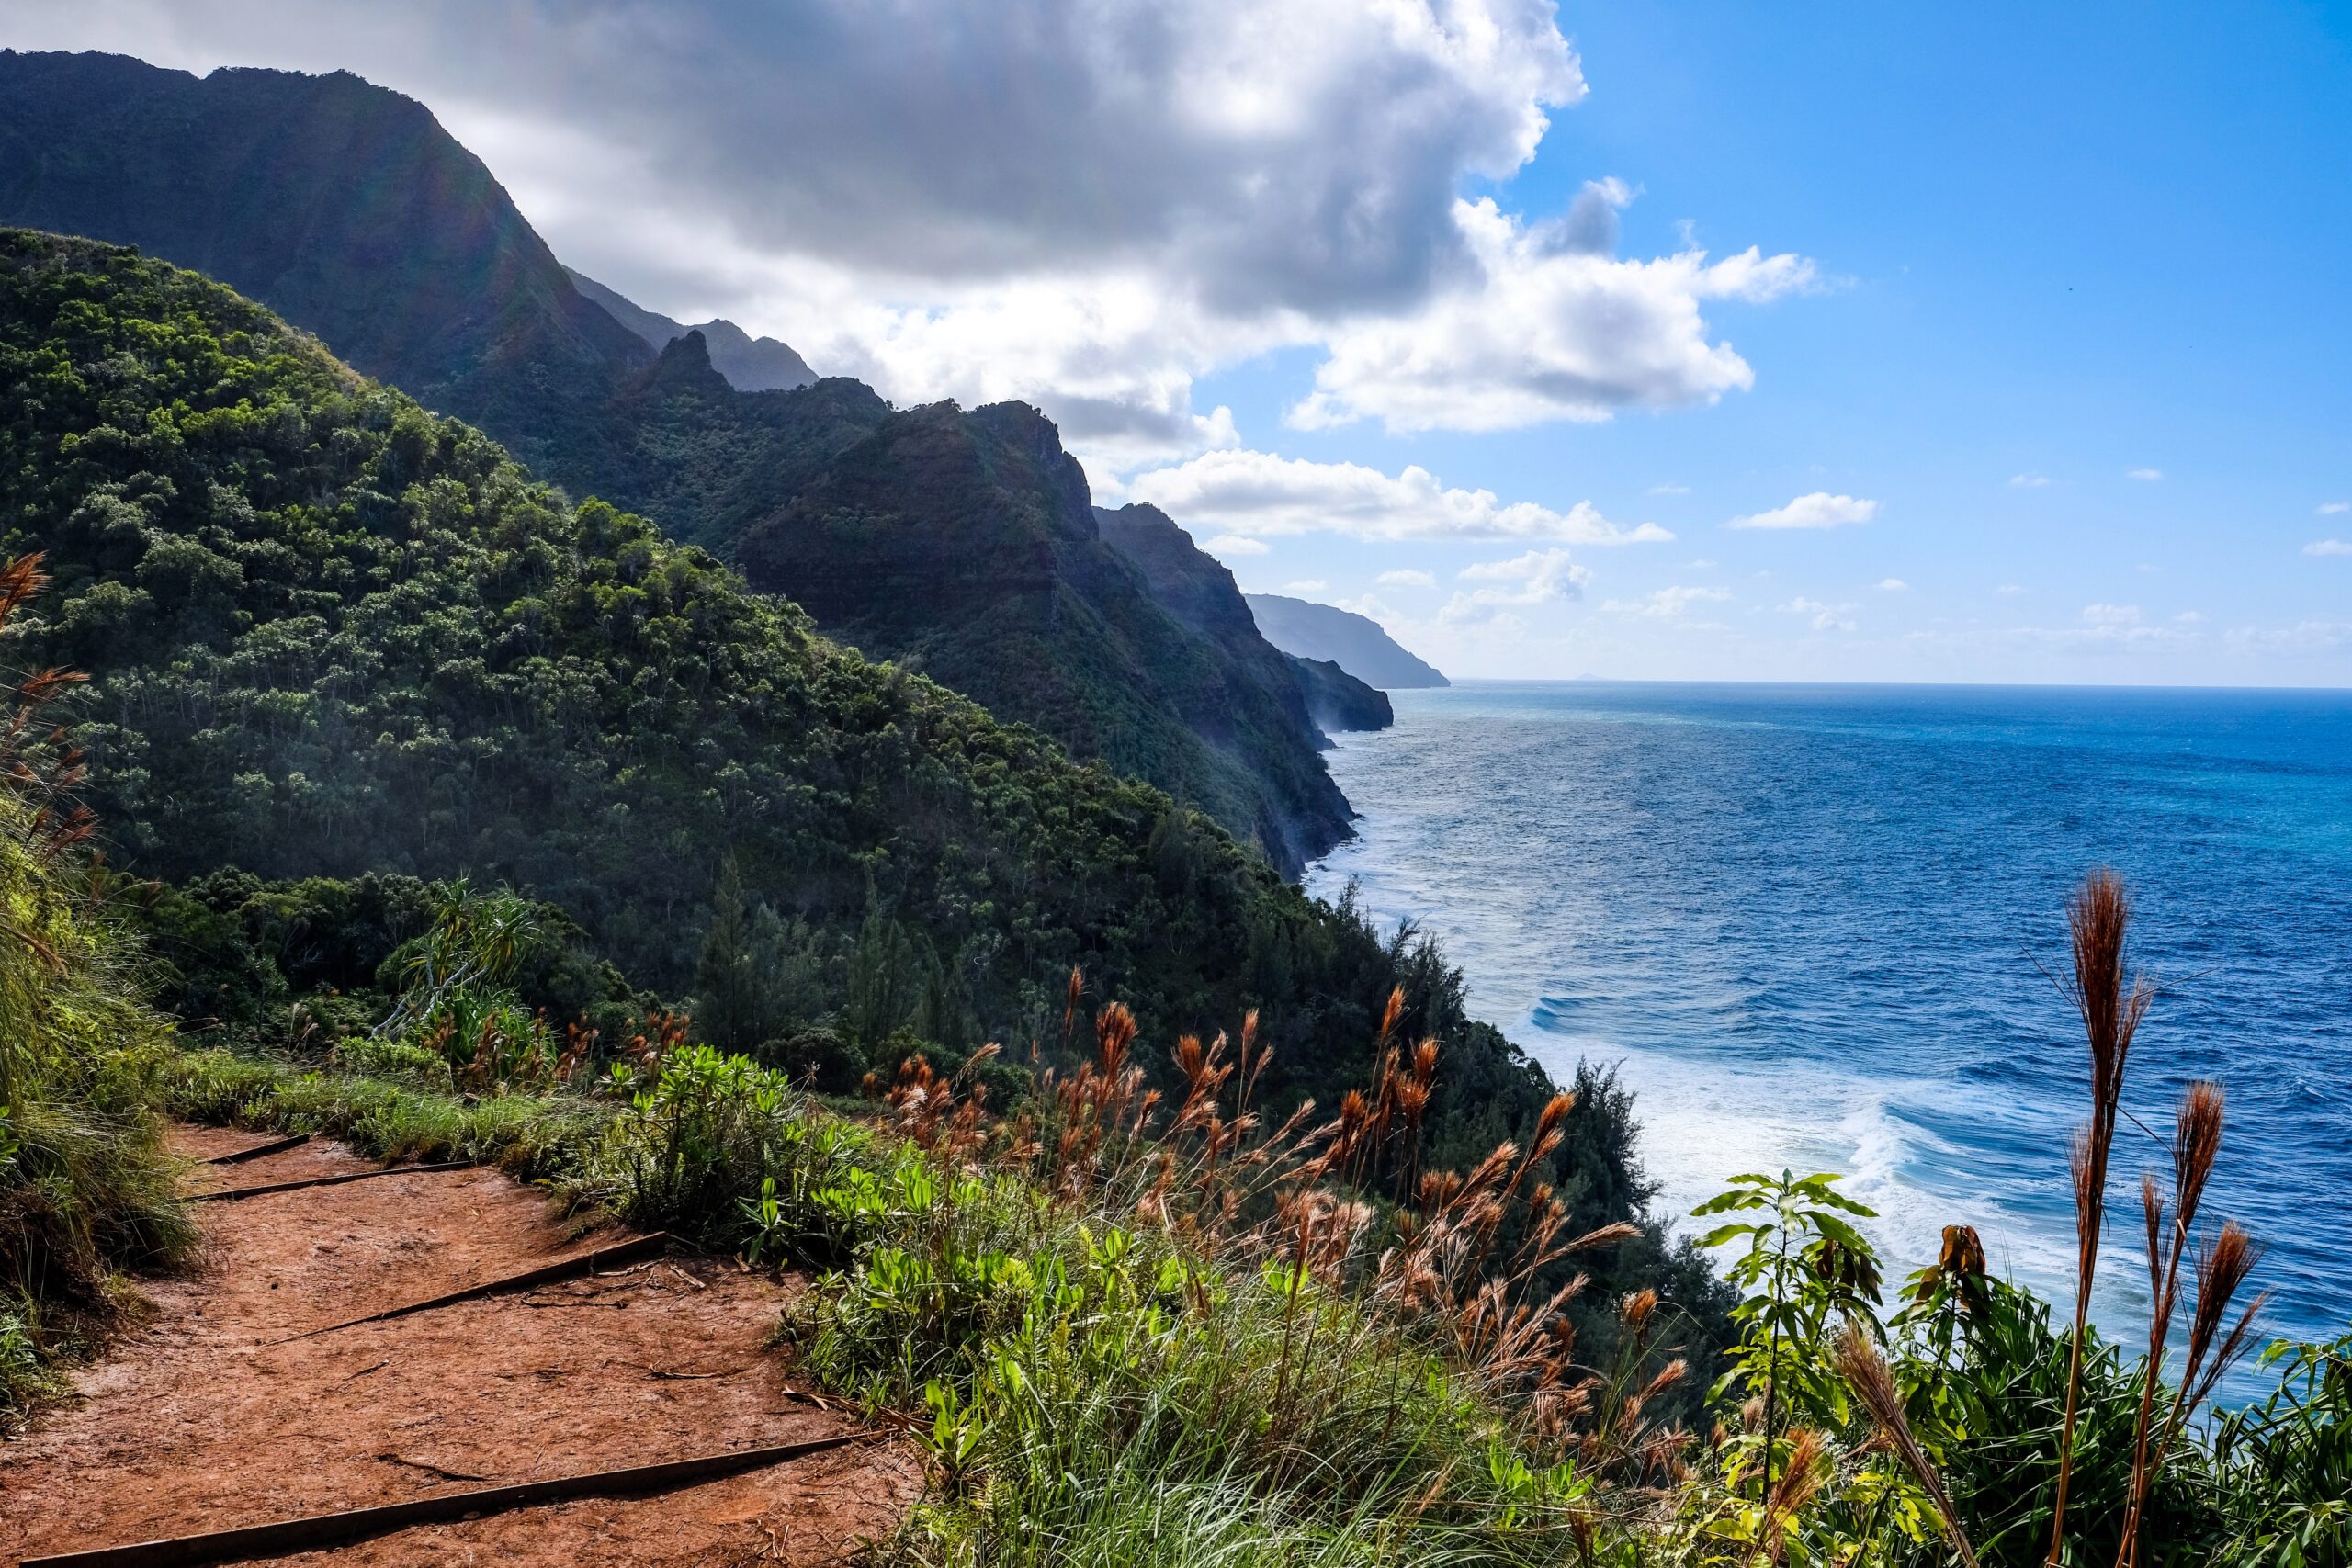 Kauai, Hawaii is a more private island for travelers to explore. 
Pictured: a lush green mountainside with clear blue waters.